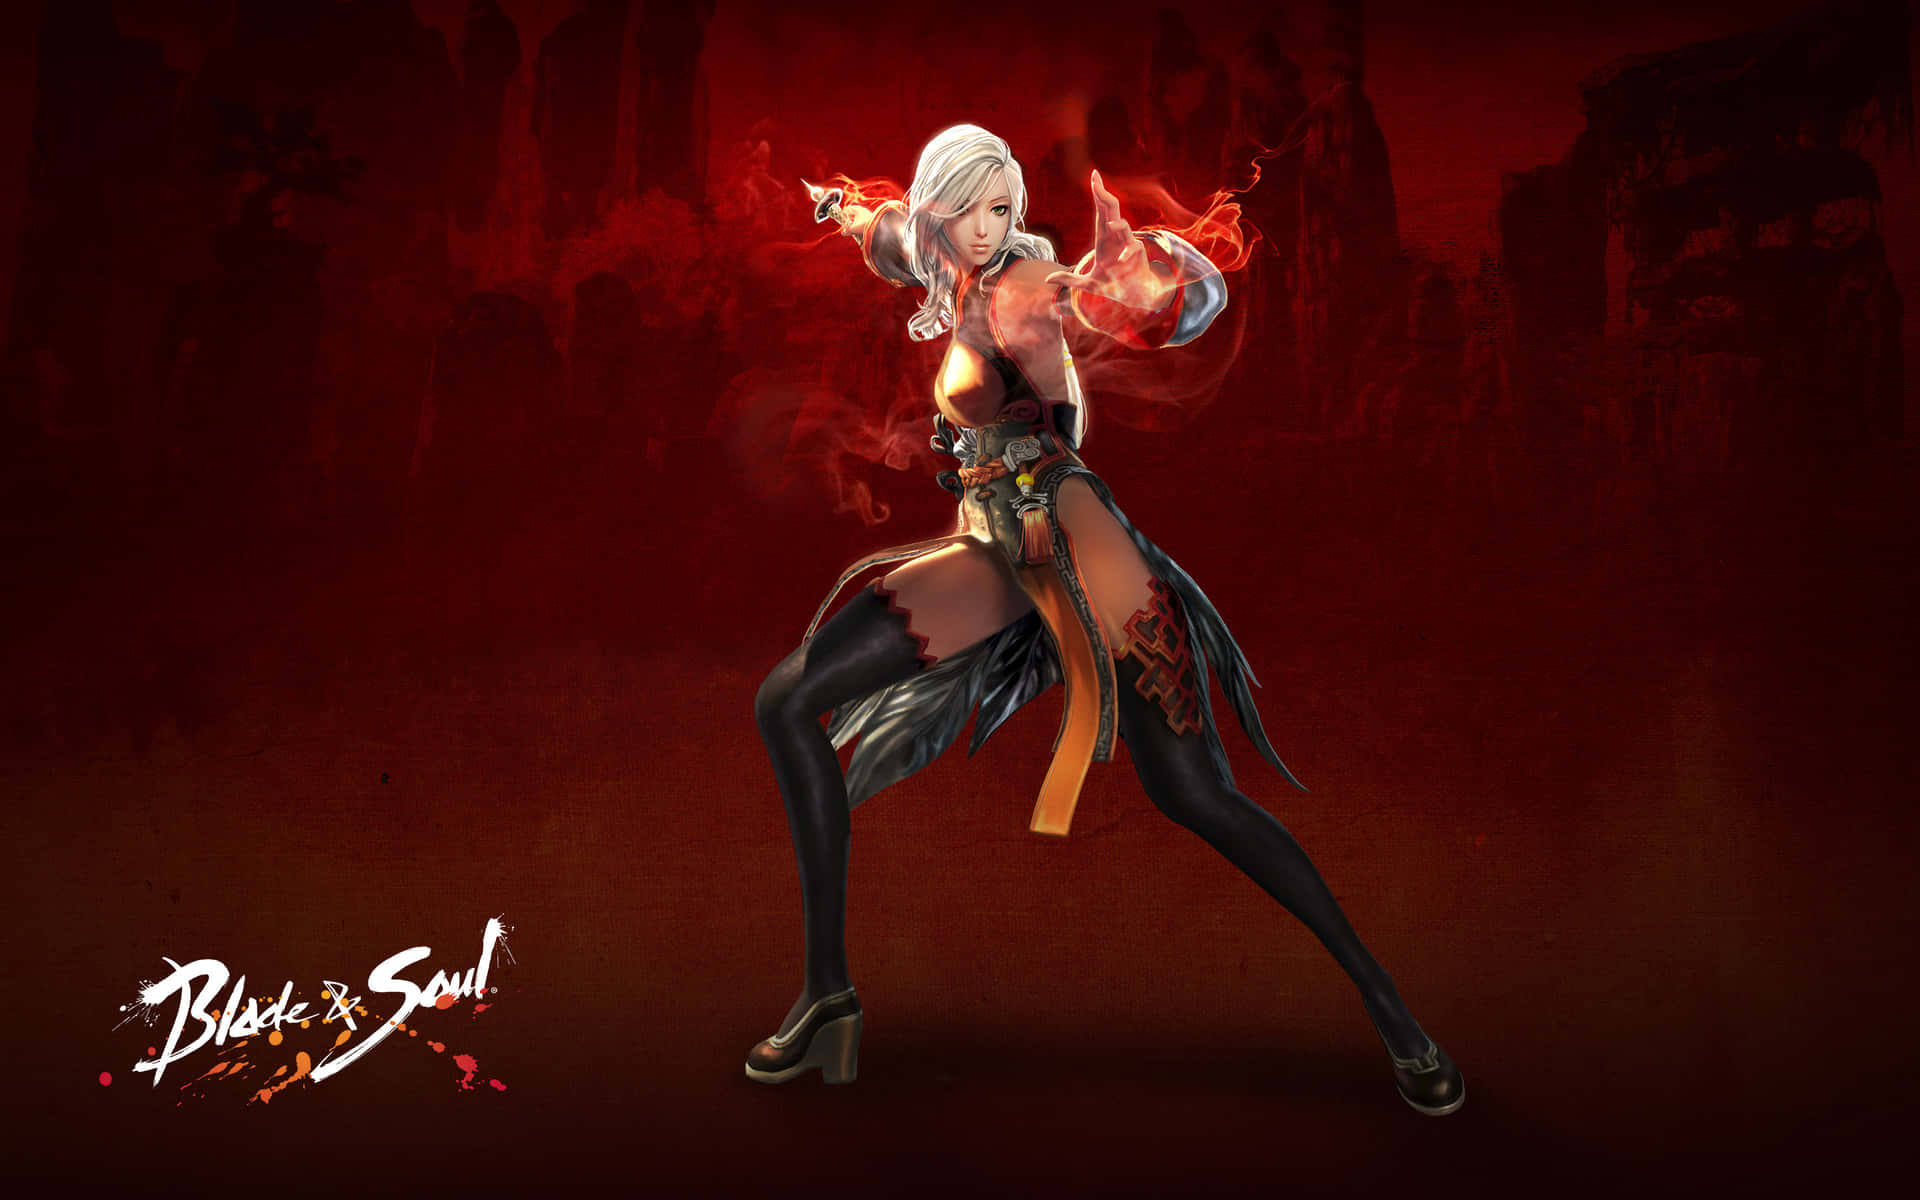 Dive into the fantasy world of Blade&Soul Wallpaper